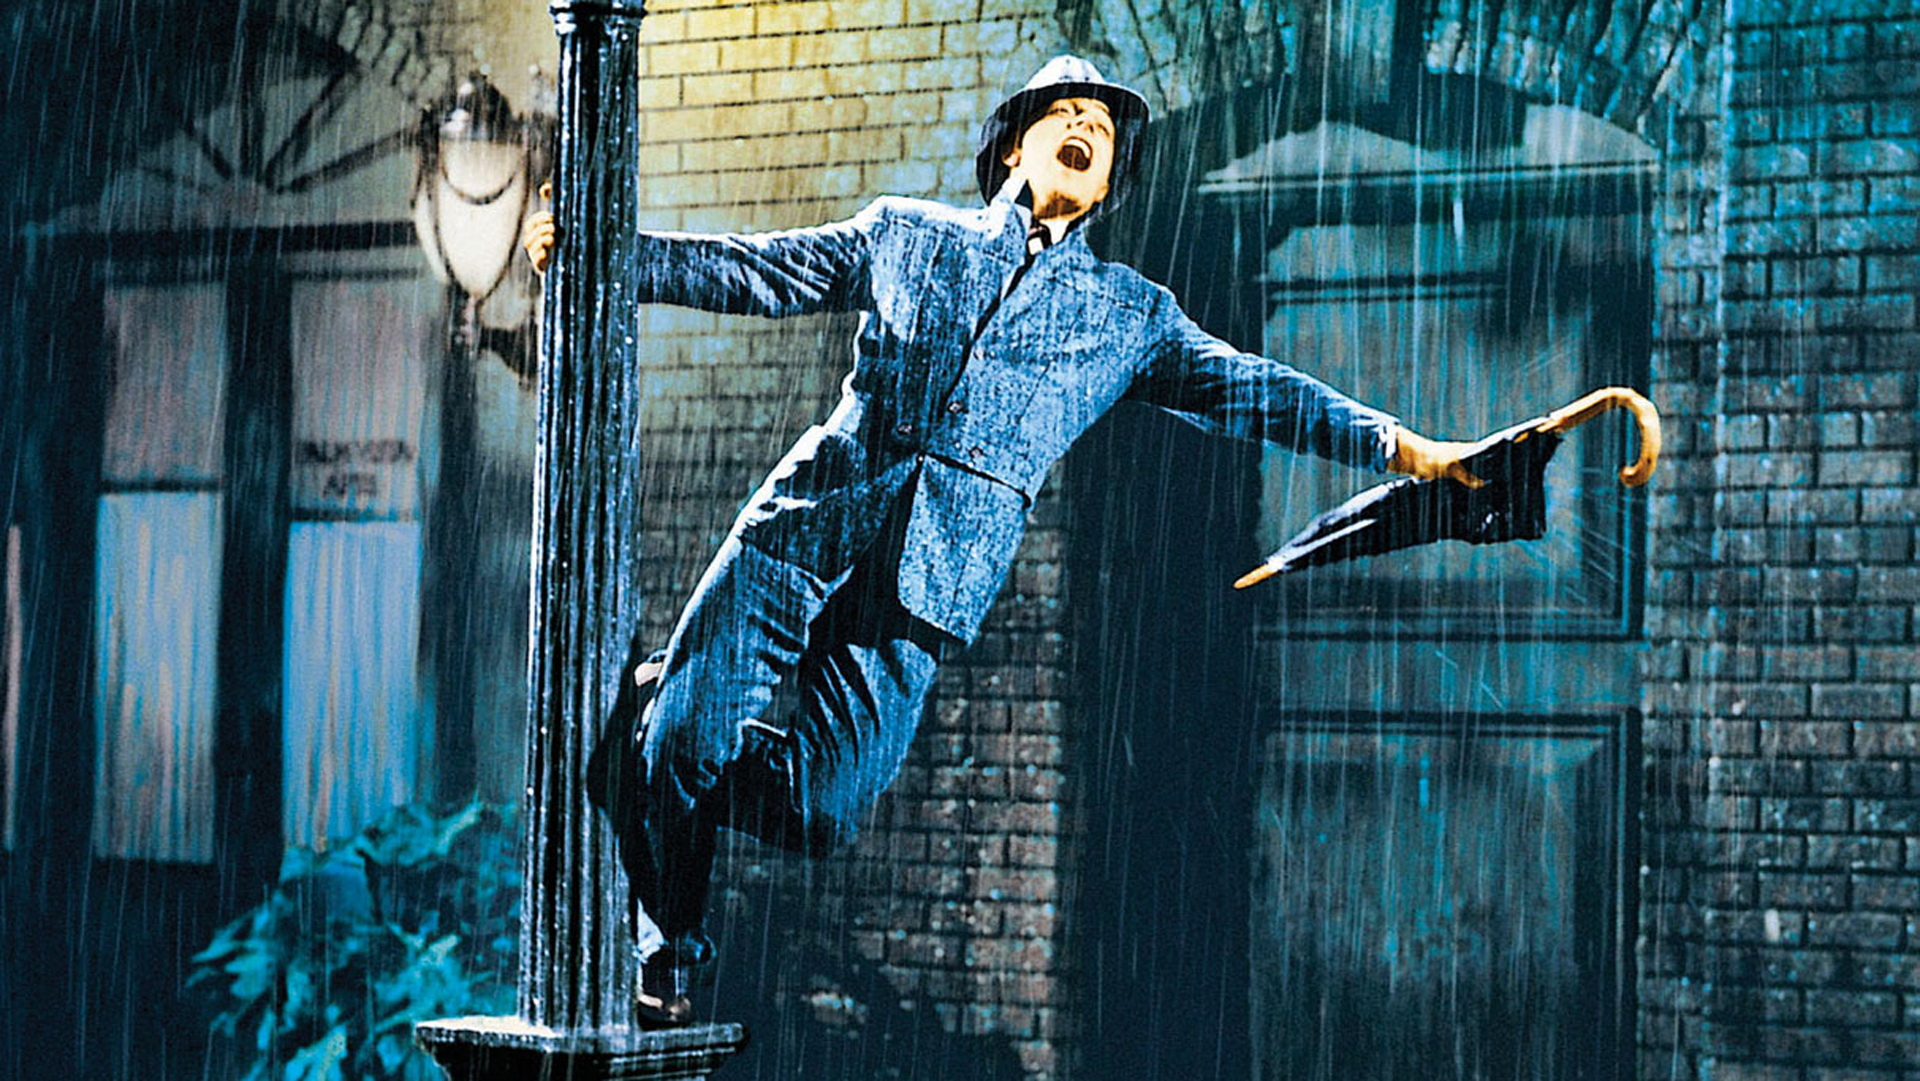 Expanding our capacity to choose: Singing in the Rain